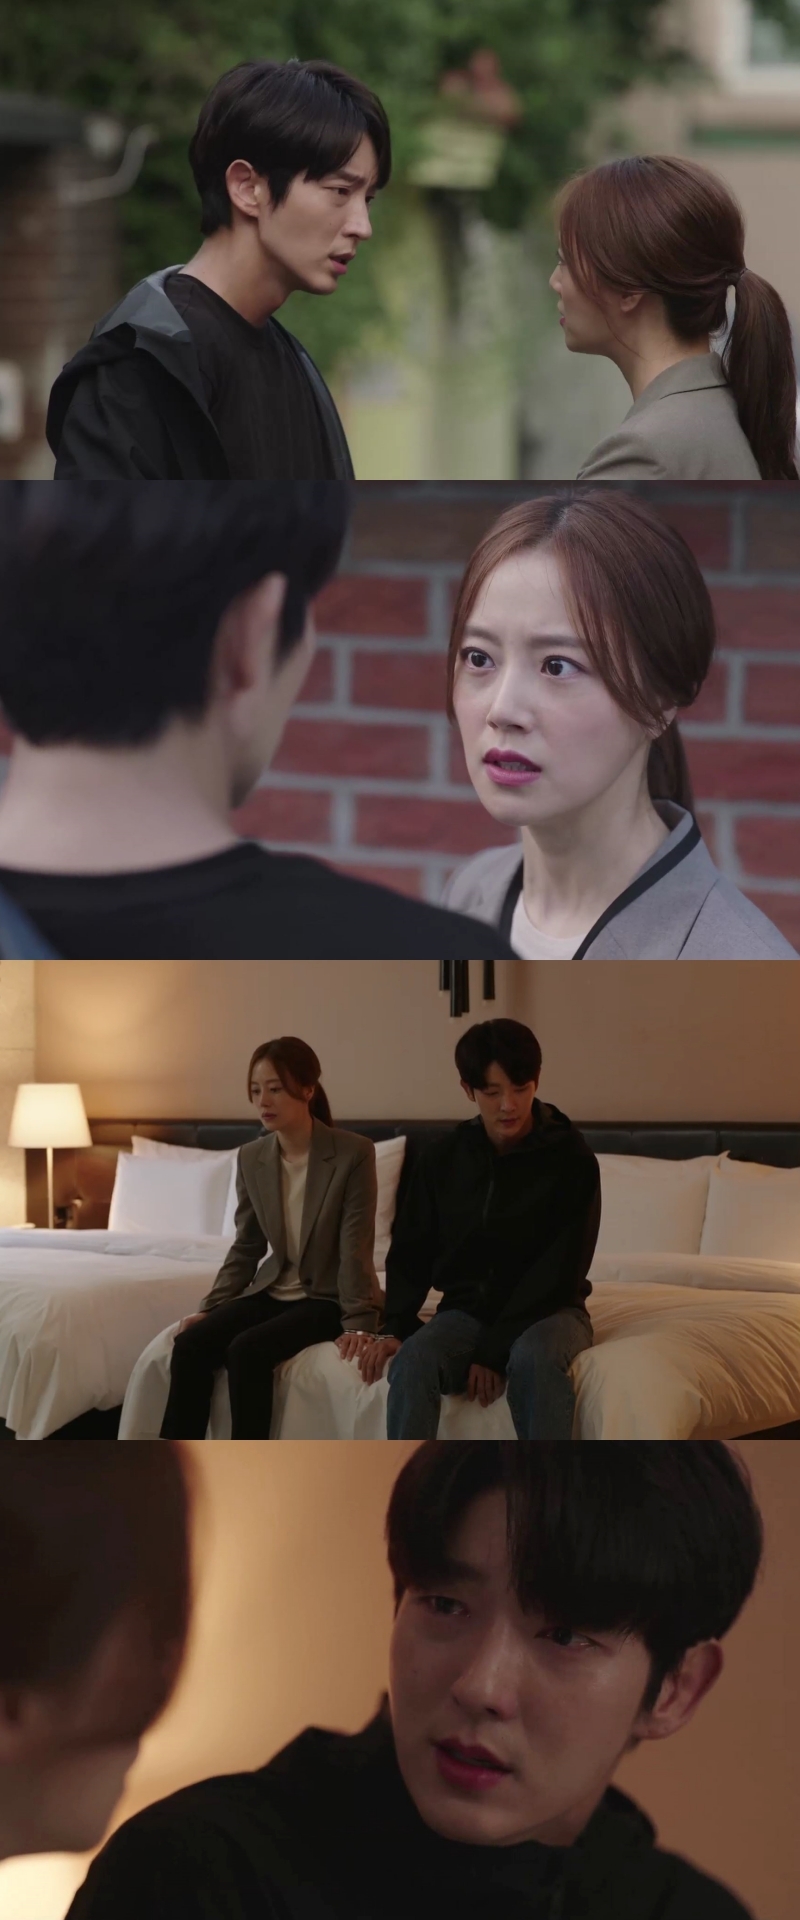 Seoul = = Lee Joon-gi and Moon Chae-won in Flower of Evil kick off Handcuffs DateIn the 14th episode of TVNs Flower of Evil (directed by Kim Cheol-gyu/playplayplayed by Yoo Jung-hee), which is broadcasted at 10:50 p.m. on the 16th, Do Hyun-soo (Lee Joon-gi), who was driven to the murder case, and his wife, Cha Ji-won, who became his hostage, are taking a dangerous getaway.In the last 12 and 13 episodes, Baek Hee-sung (Kim Ji-hoon) murdered a housekeeper who knew the secrets of the family and manipulated the evidence with his parents, Baek Man-woo (Son Jong-hak), and Kong Mi-ja (Nam Ki-ae).The evidence that pointed to Do Hyun-soo as a criminal inevitably filled the Handcuffs, but suddenly he turned eerie, and Do Hyun-soo blocked the CCTV that used her as a hostage and illuminated them.The ending, which I could not imagine, has exploded my curiosity about the next story by mourning viewers.Do Hyun-soo and Cha Ji-won, who are caught in the public photos, are divided into Handcuffs in each others hands, and they focus more attention.Especially, the two people who have escaped from the police feel an unusual airflow.They have already shown a couple fight that they have never seen before, such as chasing at night and following their GPS to their opponents, and there is another intense spark in the eyes that shoot each other as if they are angry.In addition, Do Hyun-soo and Cha Ji-won, who arrived in a strange room, not a house, are still turning their backs on Handcuffs.However, Do Hyun-soos expression, which faces the car support again, makes the hearts of those who are desperate.Attention is focusing on how the two people who eventually realized the sincerity of loving each other between doubt and faith will overcome this crisis that they face as detectives and suspects once again, and what ending they will reach.Yoo Jung-hee, who wrote the Flower of Evil, also said, Do Hyun-soo and Cha Ji-won have confirmed each others love, so now they are fighting their own couple.Meanwhile, the The Flower of Evil  will be broadcast at 10:50 pm on the 16th.